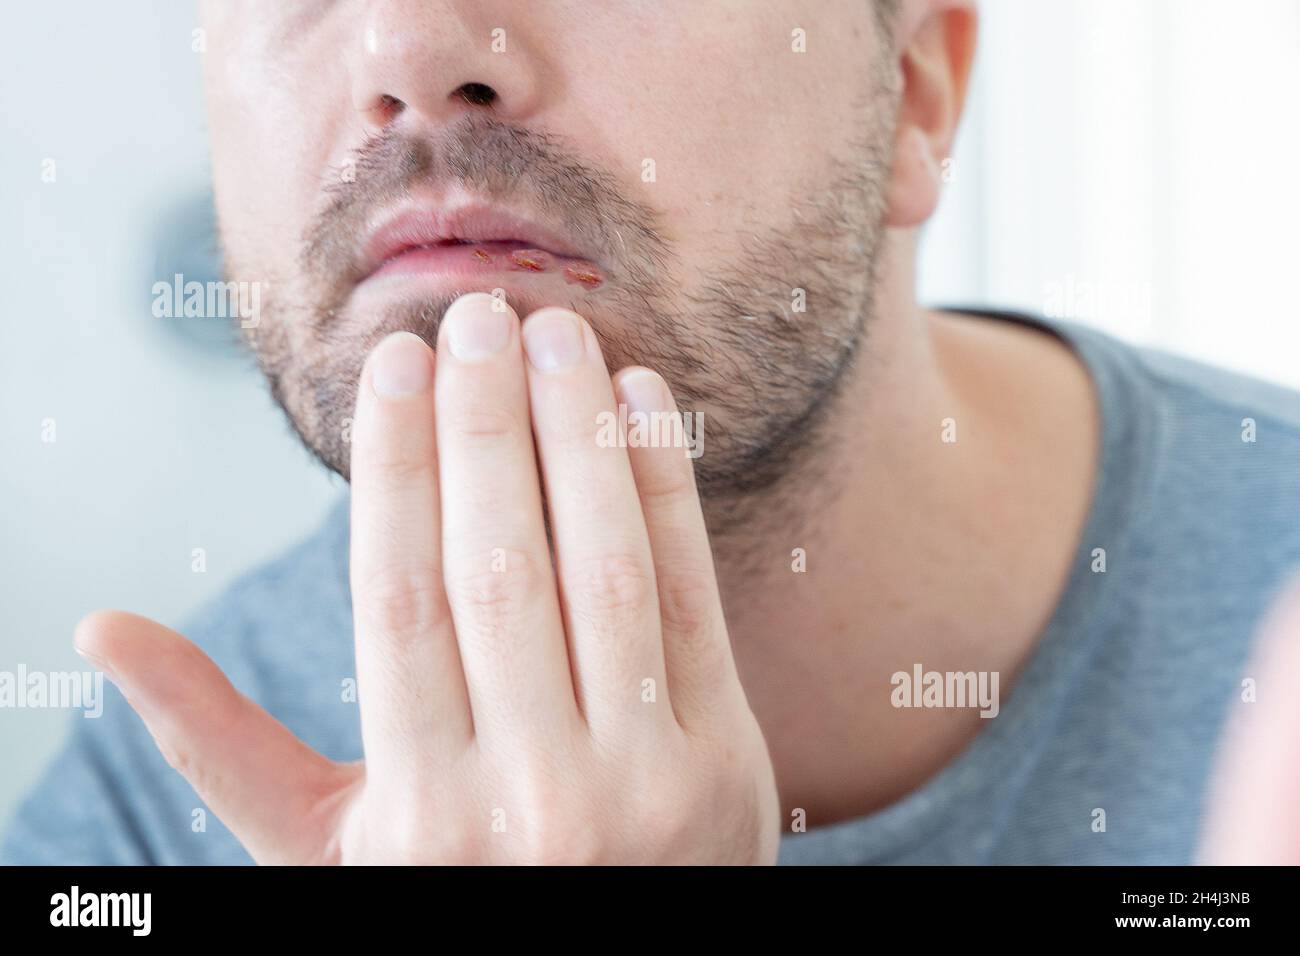 Man suffering for herpes simplex on the lips Stock Photo